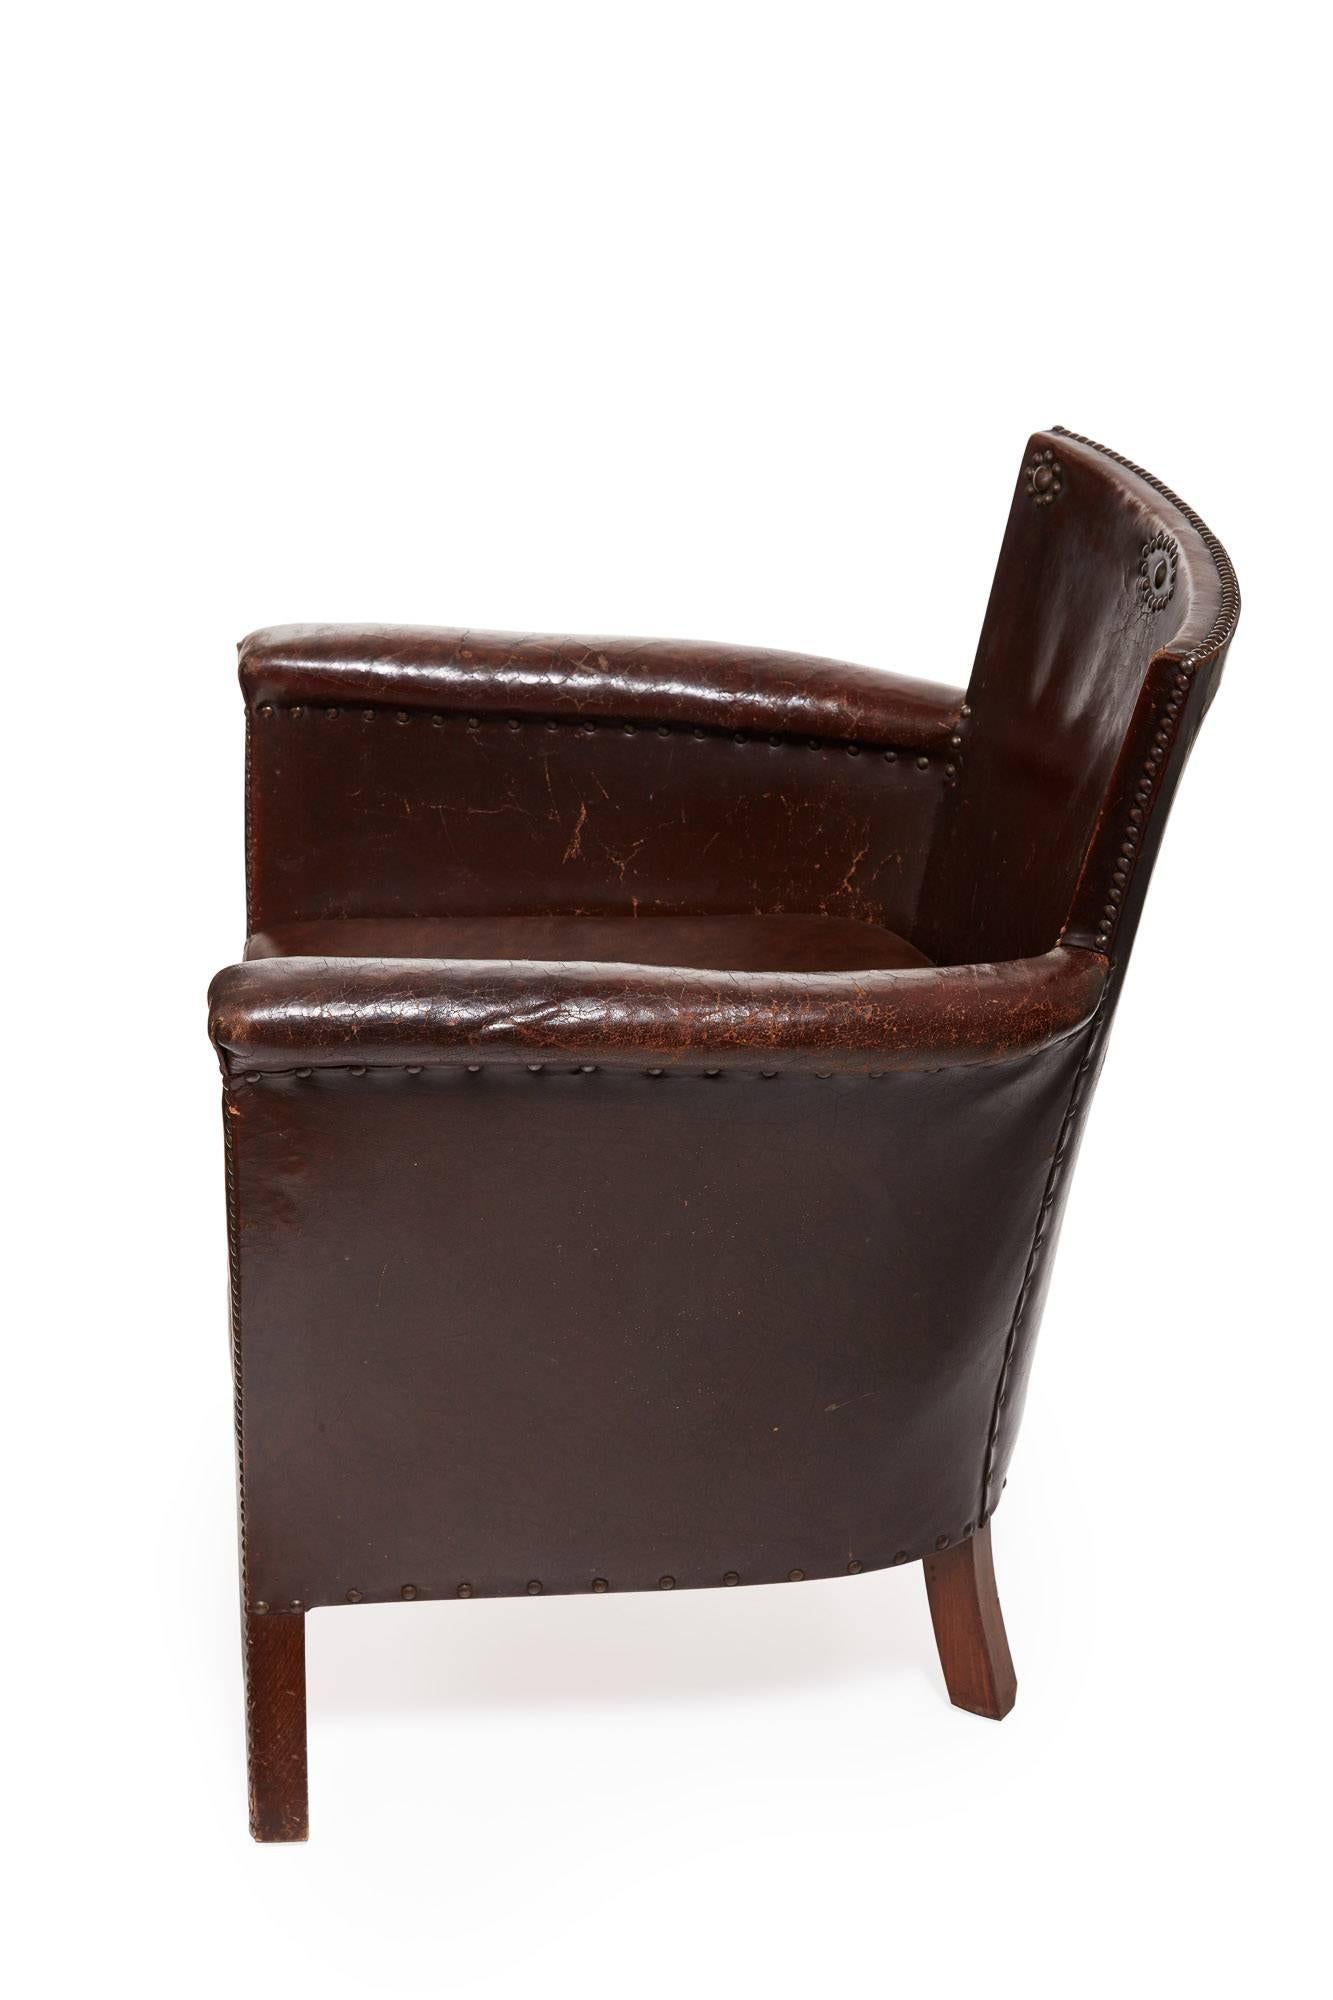 20th century Otto Schultz Swedish Leather Armchair. 
Original Leather /Nail Heads which are in great vintage condition 
Seat cushion is newly reupholstered in matching leather  
